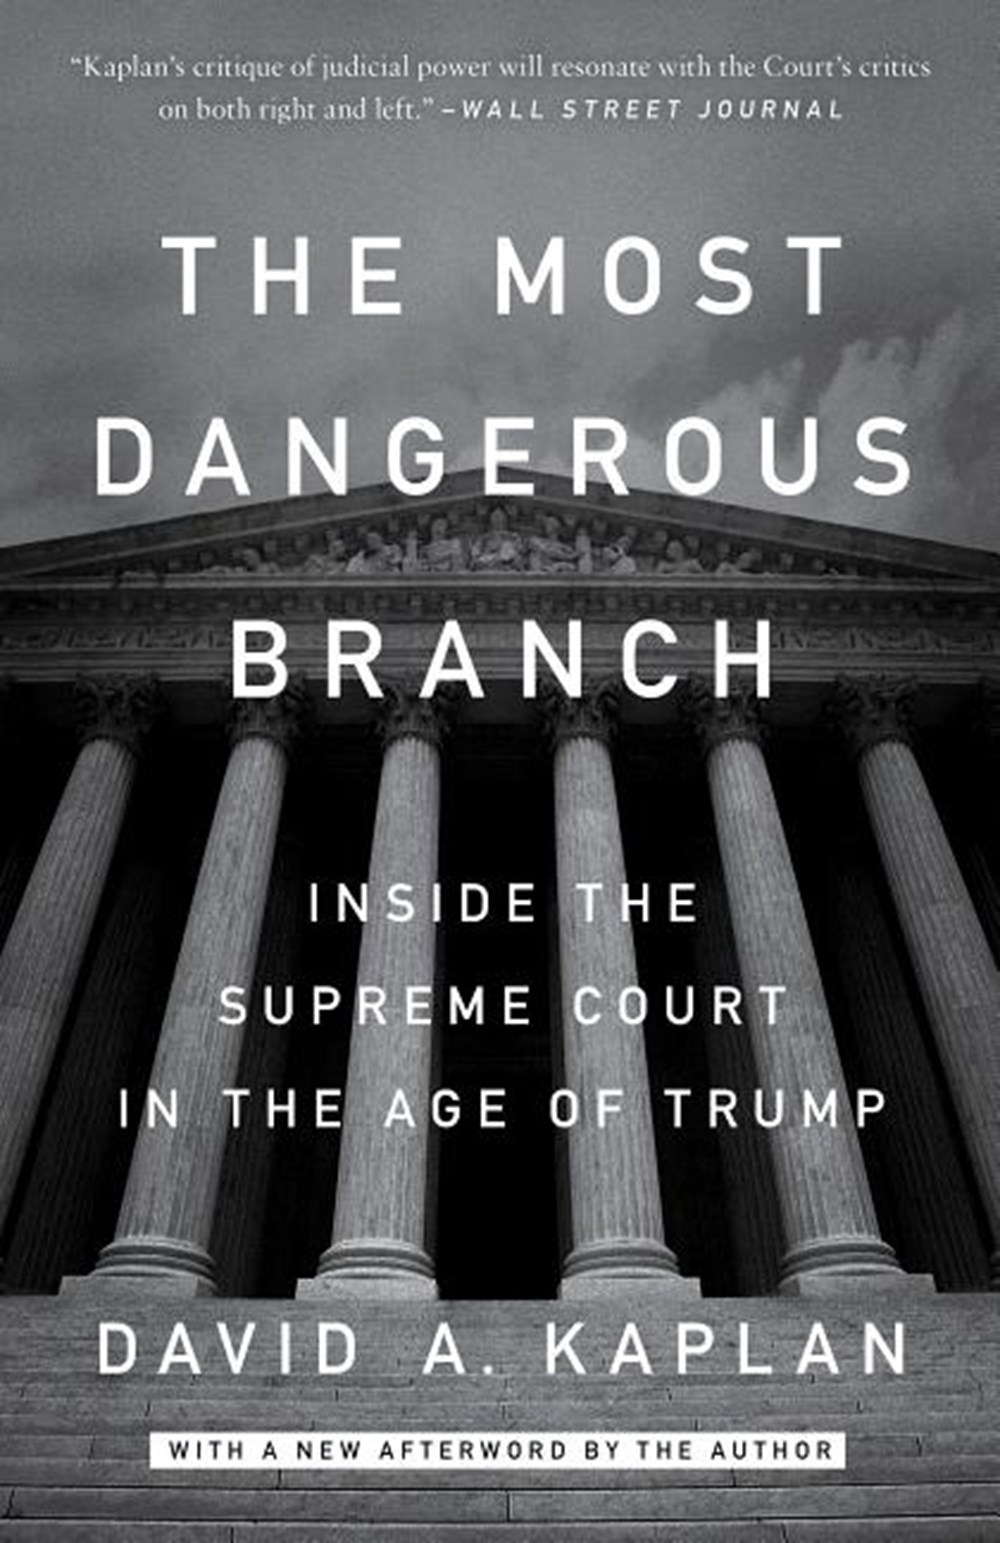 Most Dangerous Branch Inside the Supreme Court in the Age of Trump